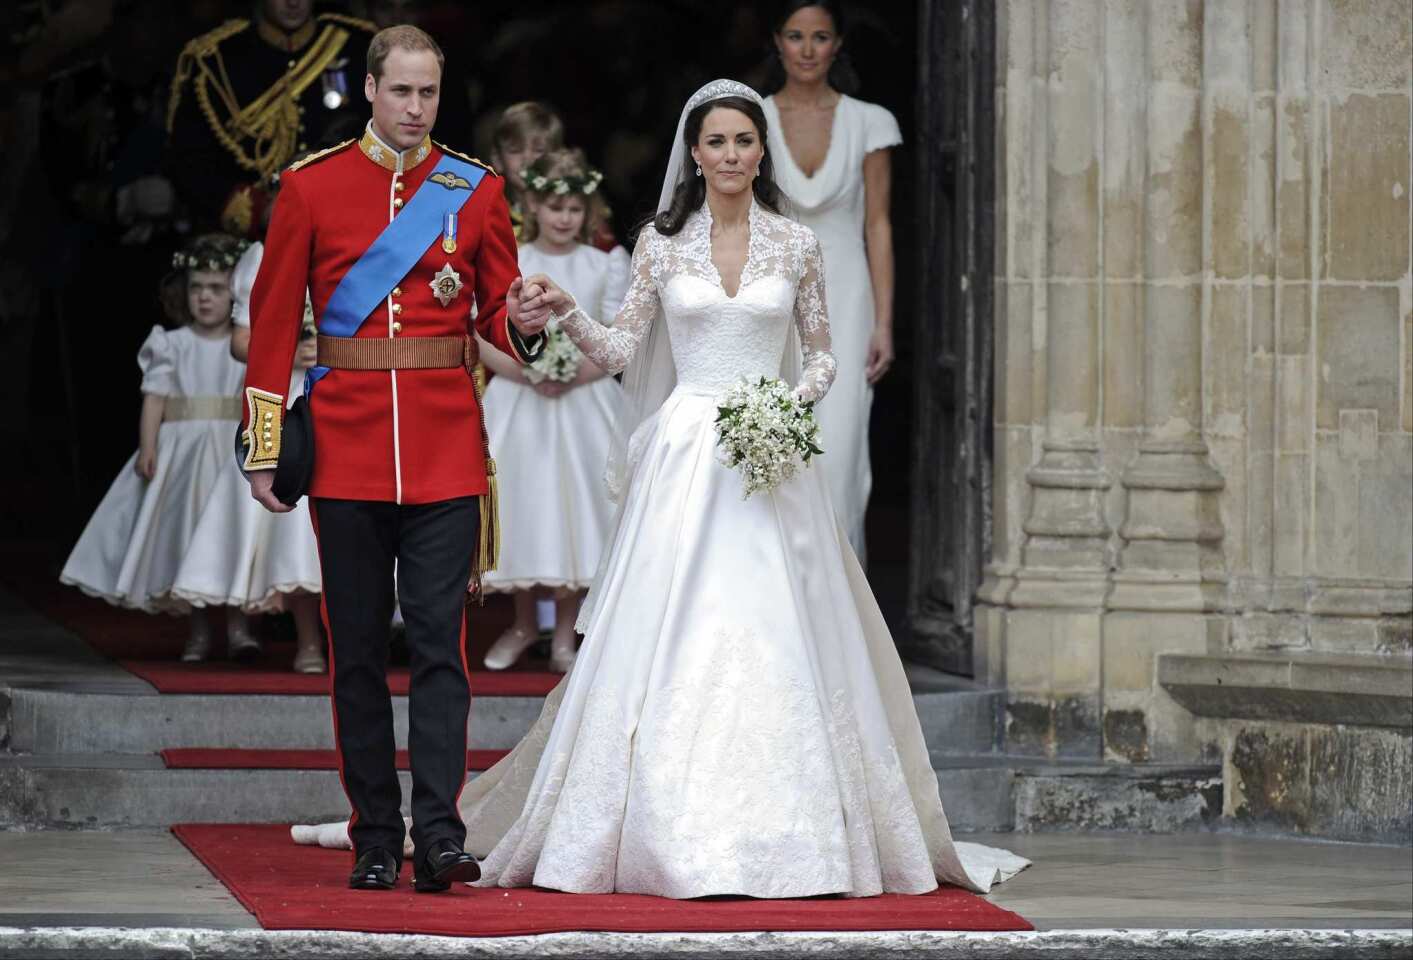 And Alexander McQueen, the label he founded, was responsible for the most speculated about, photographed and copied garment of the year: the wedding gown Kate Middleton wore to marry Prince William of England .That dress made Sarah Burton, who took over as McQueen¿s creative director, a star in her own right. (And it drew a record 600,000 people to Buckingham Palace when it was displayed over the summer.)